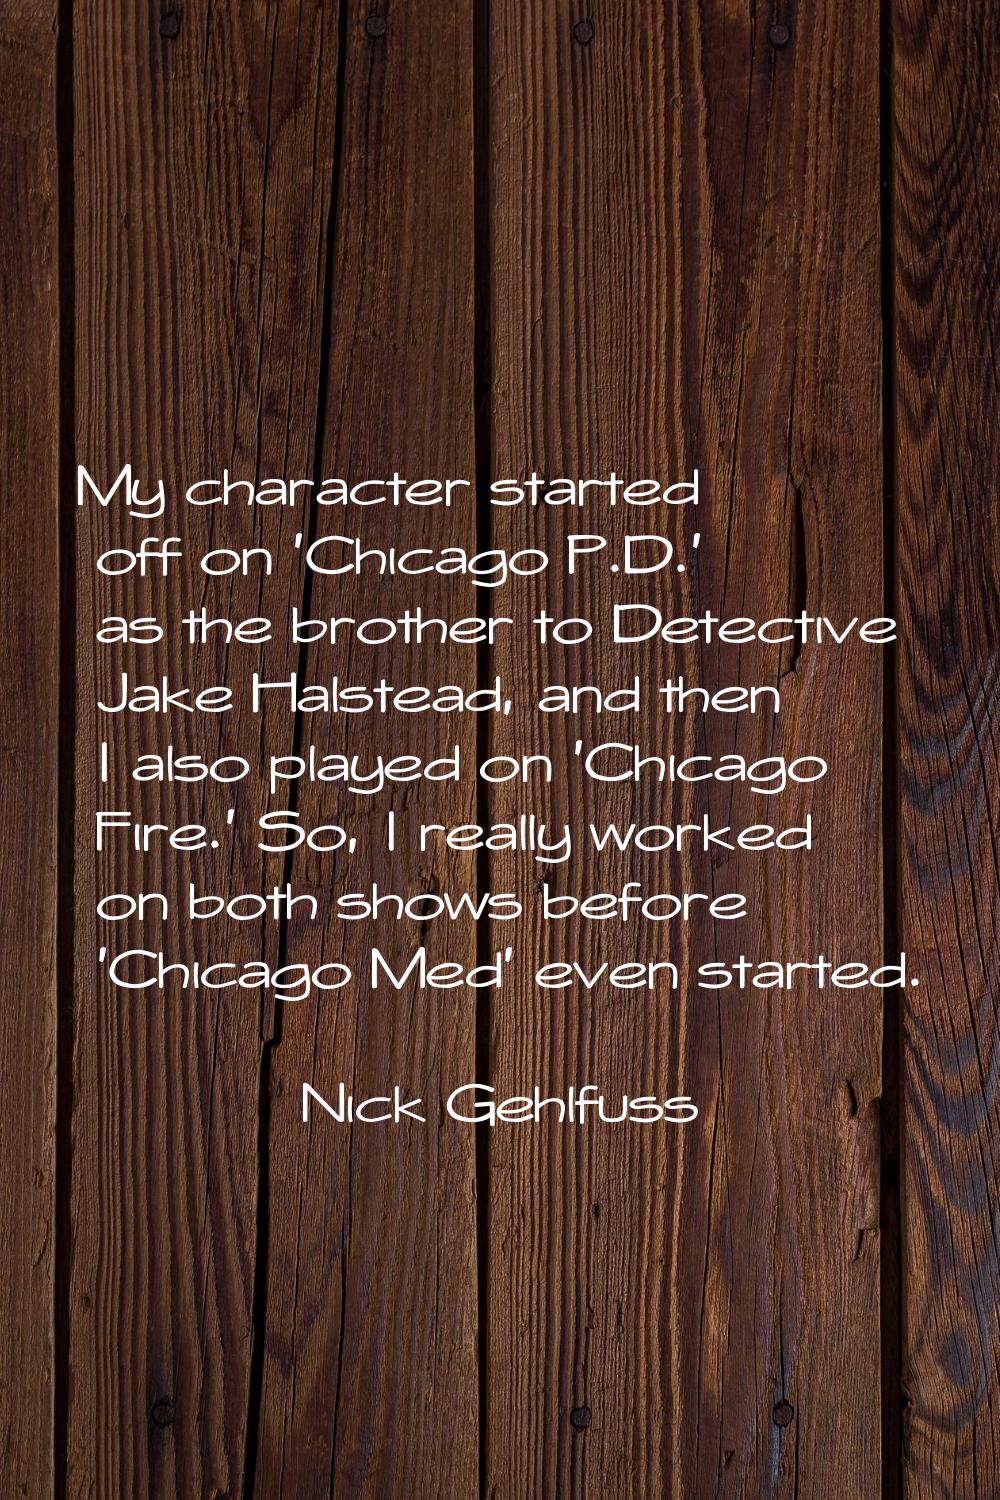 My character started off on 'Chicago P.D.' as the brother to Detective Jake Halstead, and then I al